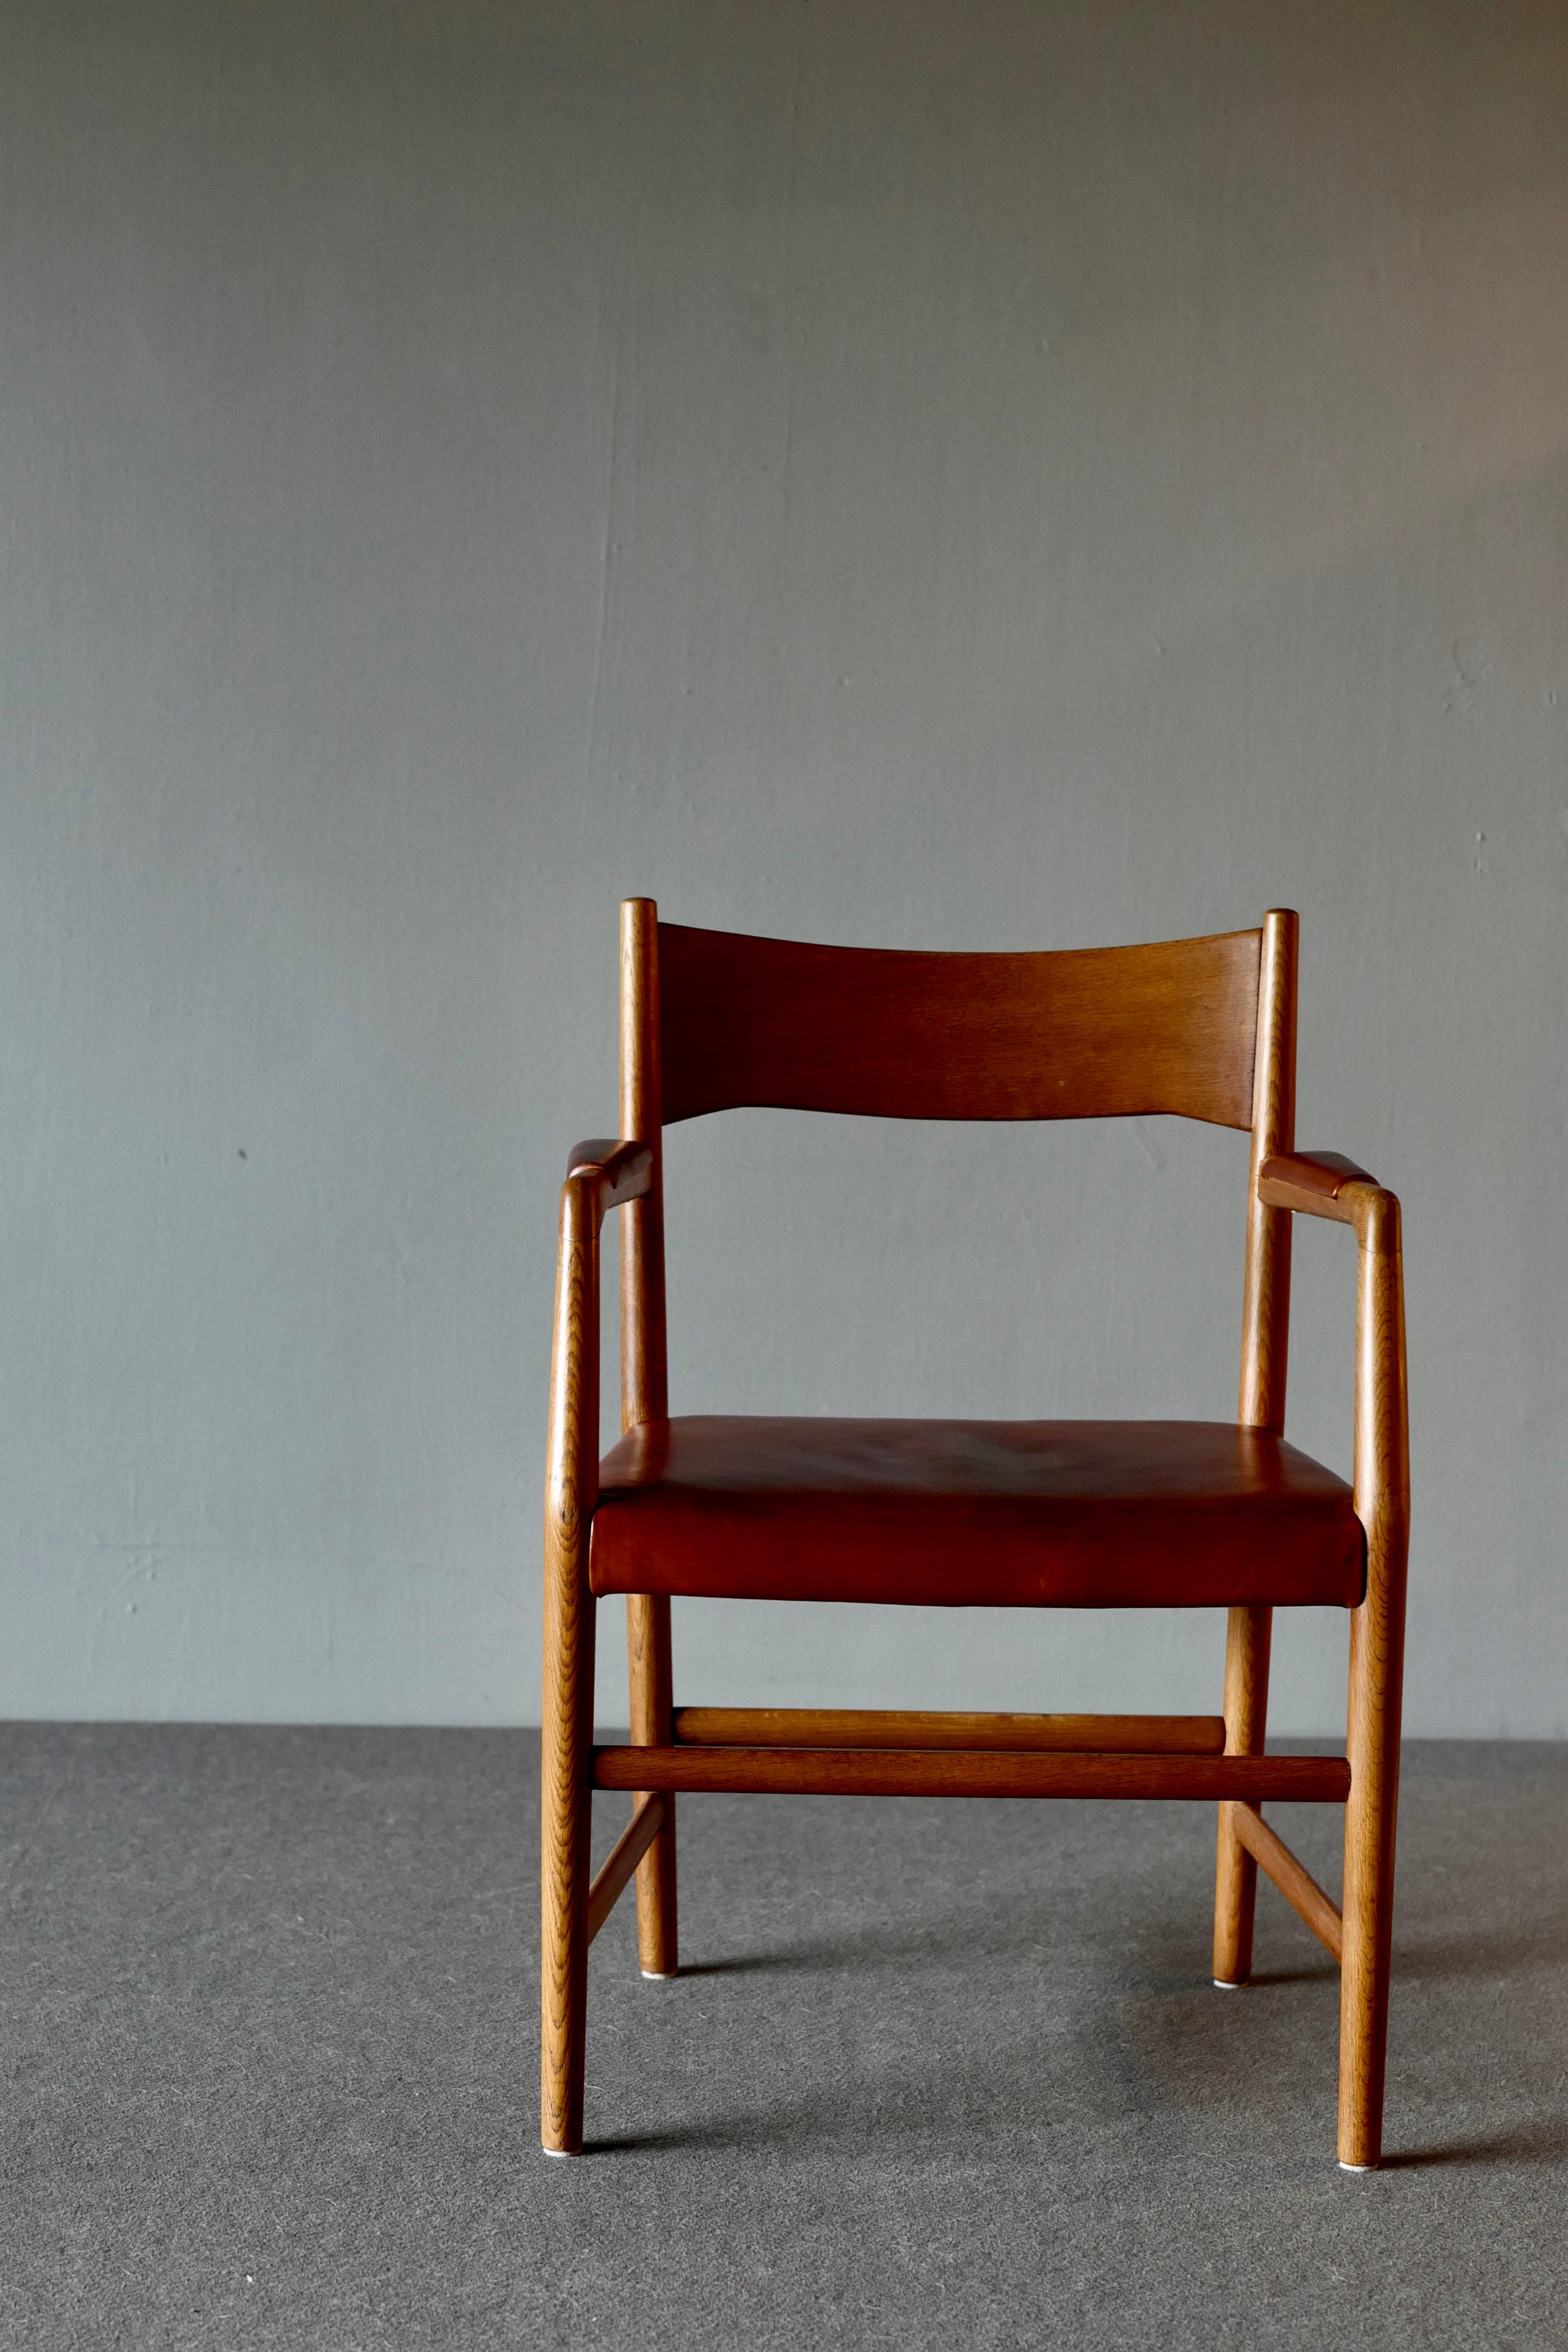 Armchairs, called the “Town Hall’ chairs by Hans Wegner for Plan Møbler. They have a solid oak frame and are upholstered with well patinated cognac colored leather, circa 1940s

These chairs were part of the furniture for the Aarhus City Hall